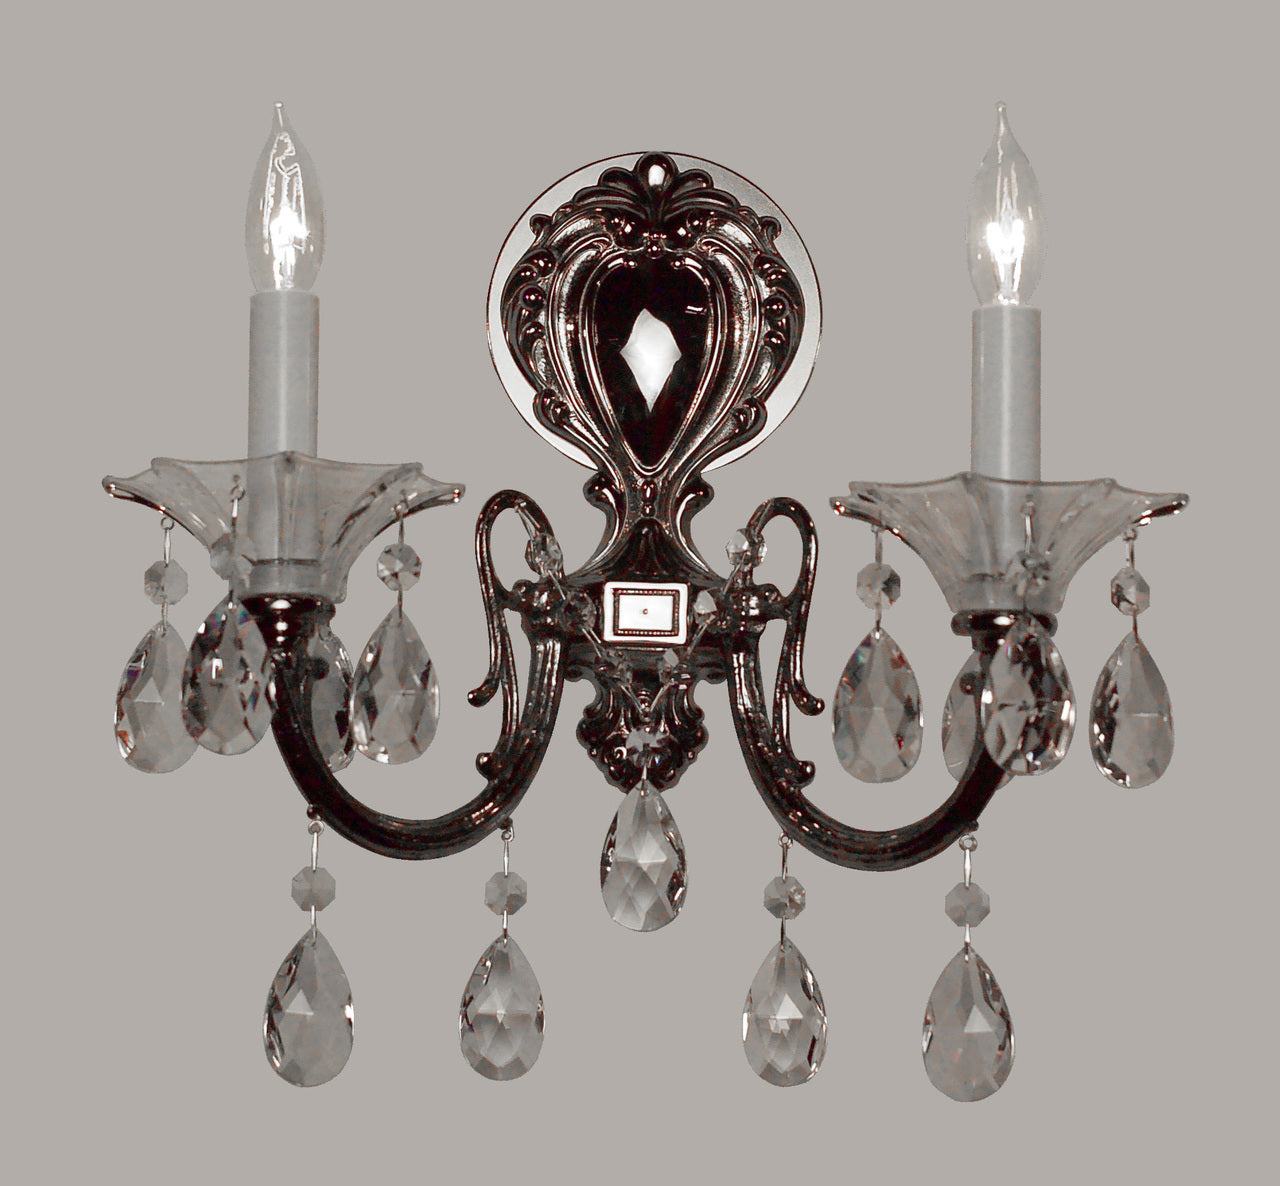 Classic Lighting 57052 CHP CBK Via Lombardi Crystal Wall Sconce in Champagne Pearl (Imported from Spain)